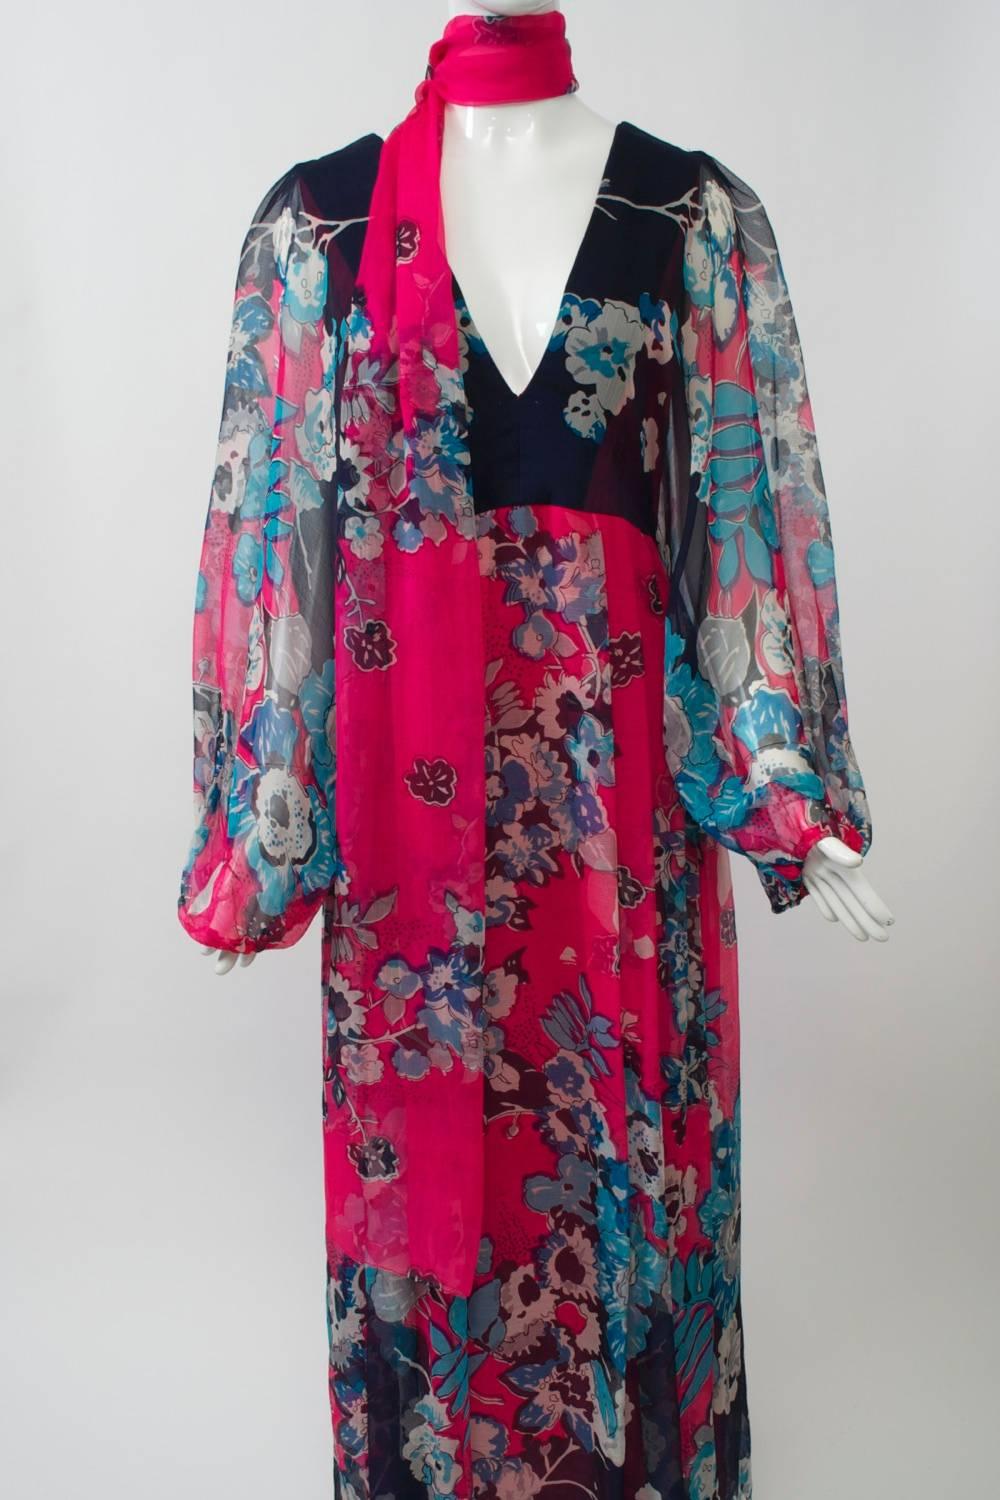 Fuchsia/Navy Silk Chiffon Print Dress In Excellent Condition For Sale In Alford, MA